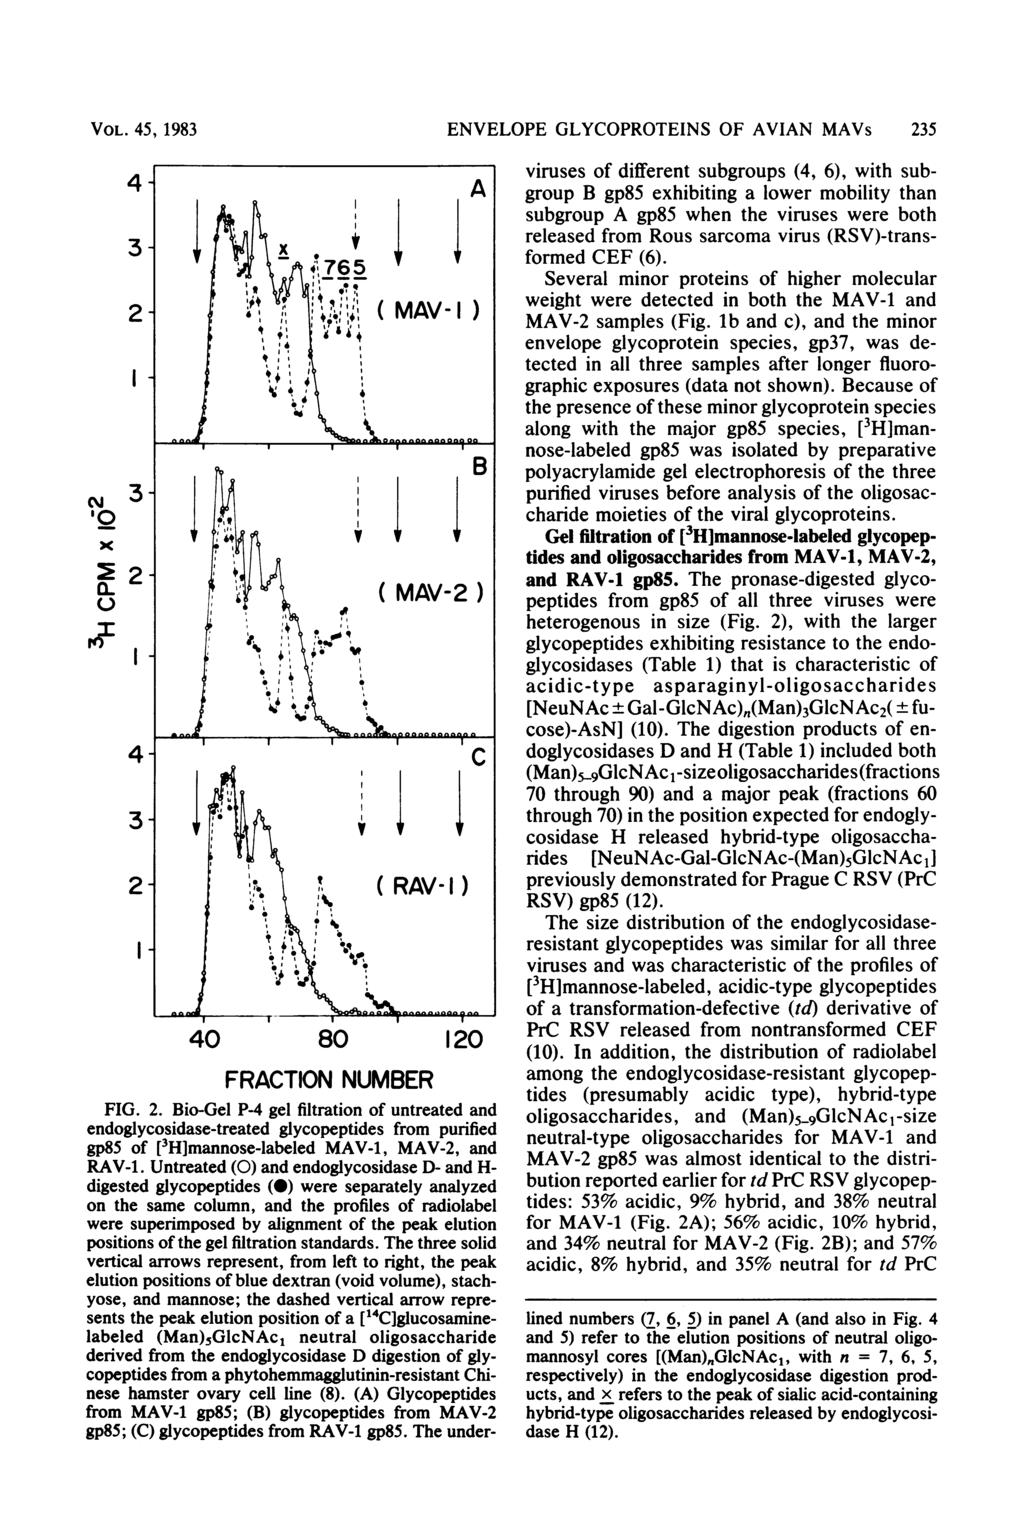 VOL. 45, 1983 4 3 2-1 cm 3 '0 x 2 2- O I 4-3 2 ENVELOPE GLYCOPROTEINS OF AVIAN MAVs 235 viruses of different subgroups (4, 6), with sub- A group B gp85 exhibiting a lower mobility than subgroup A